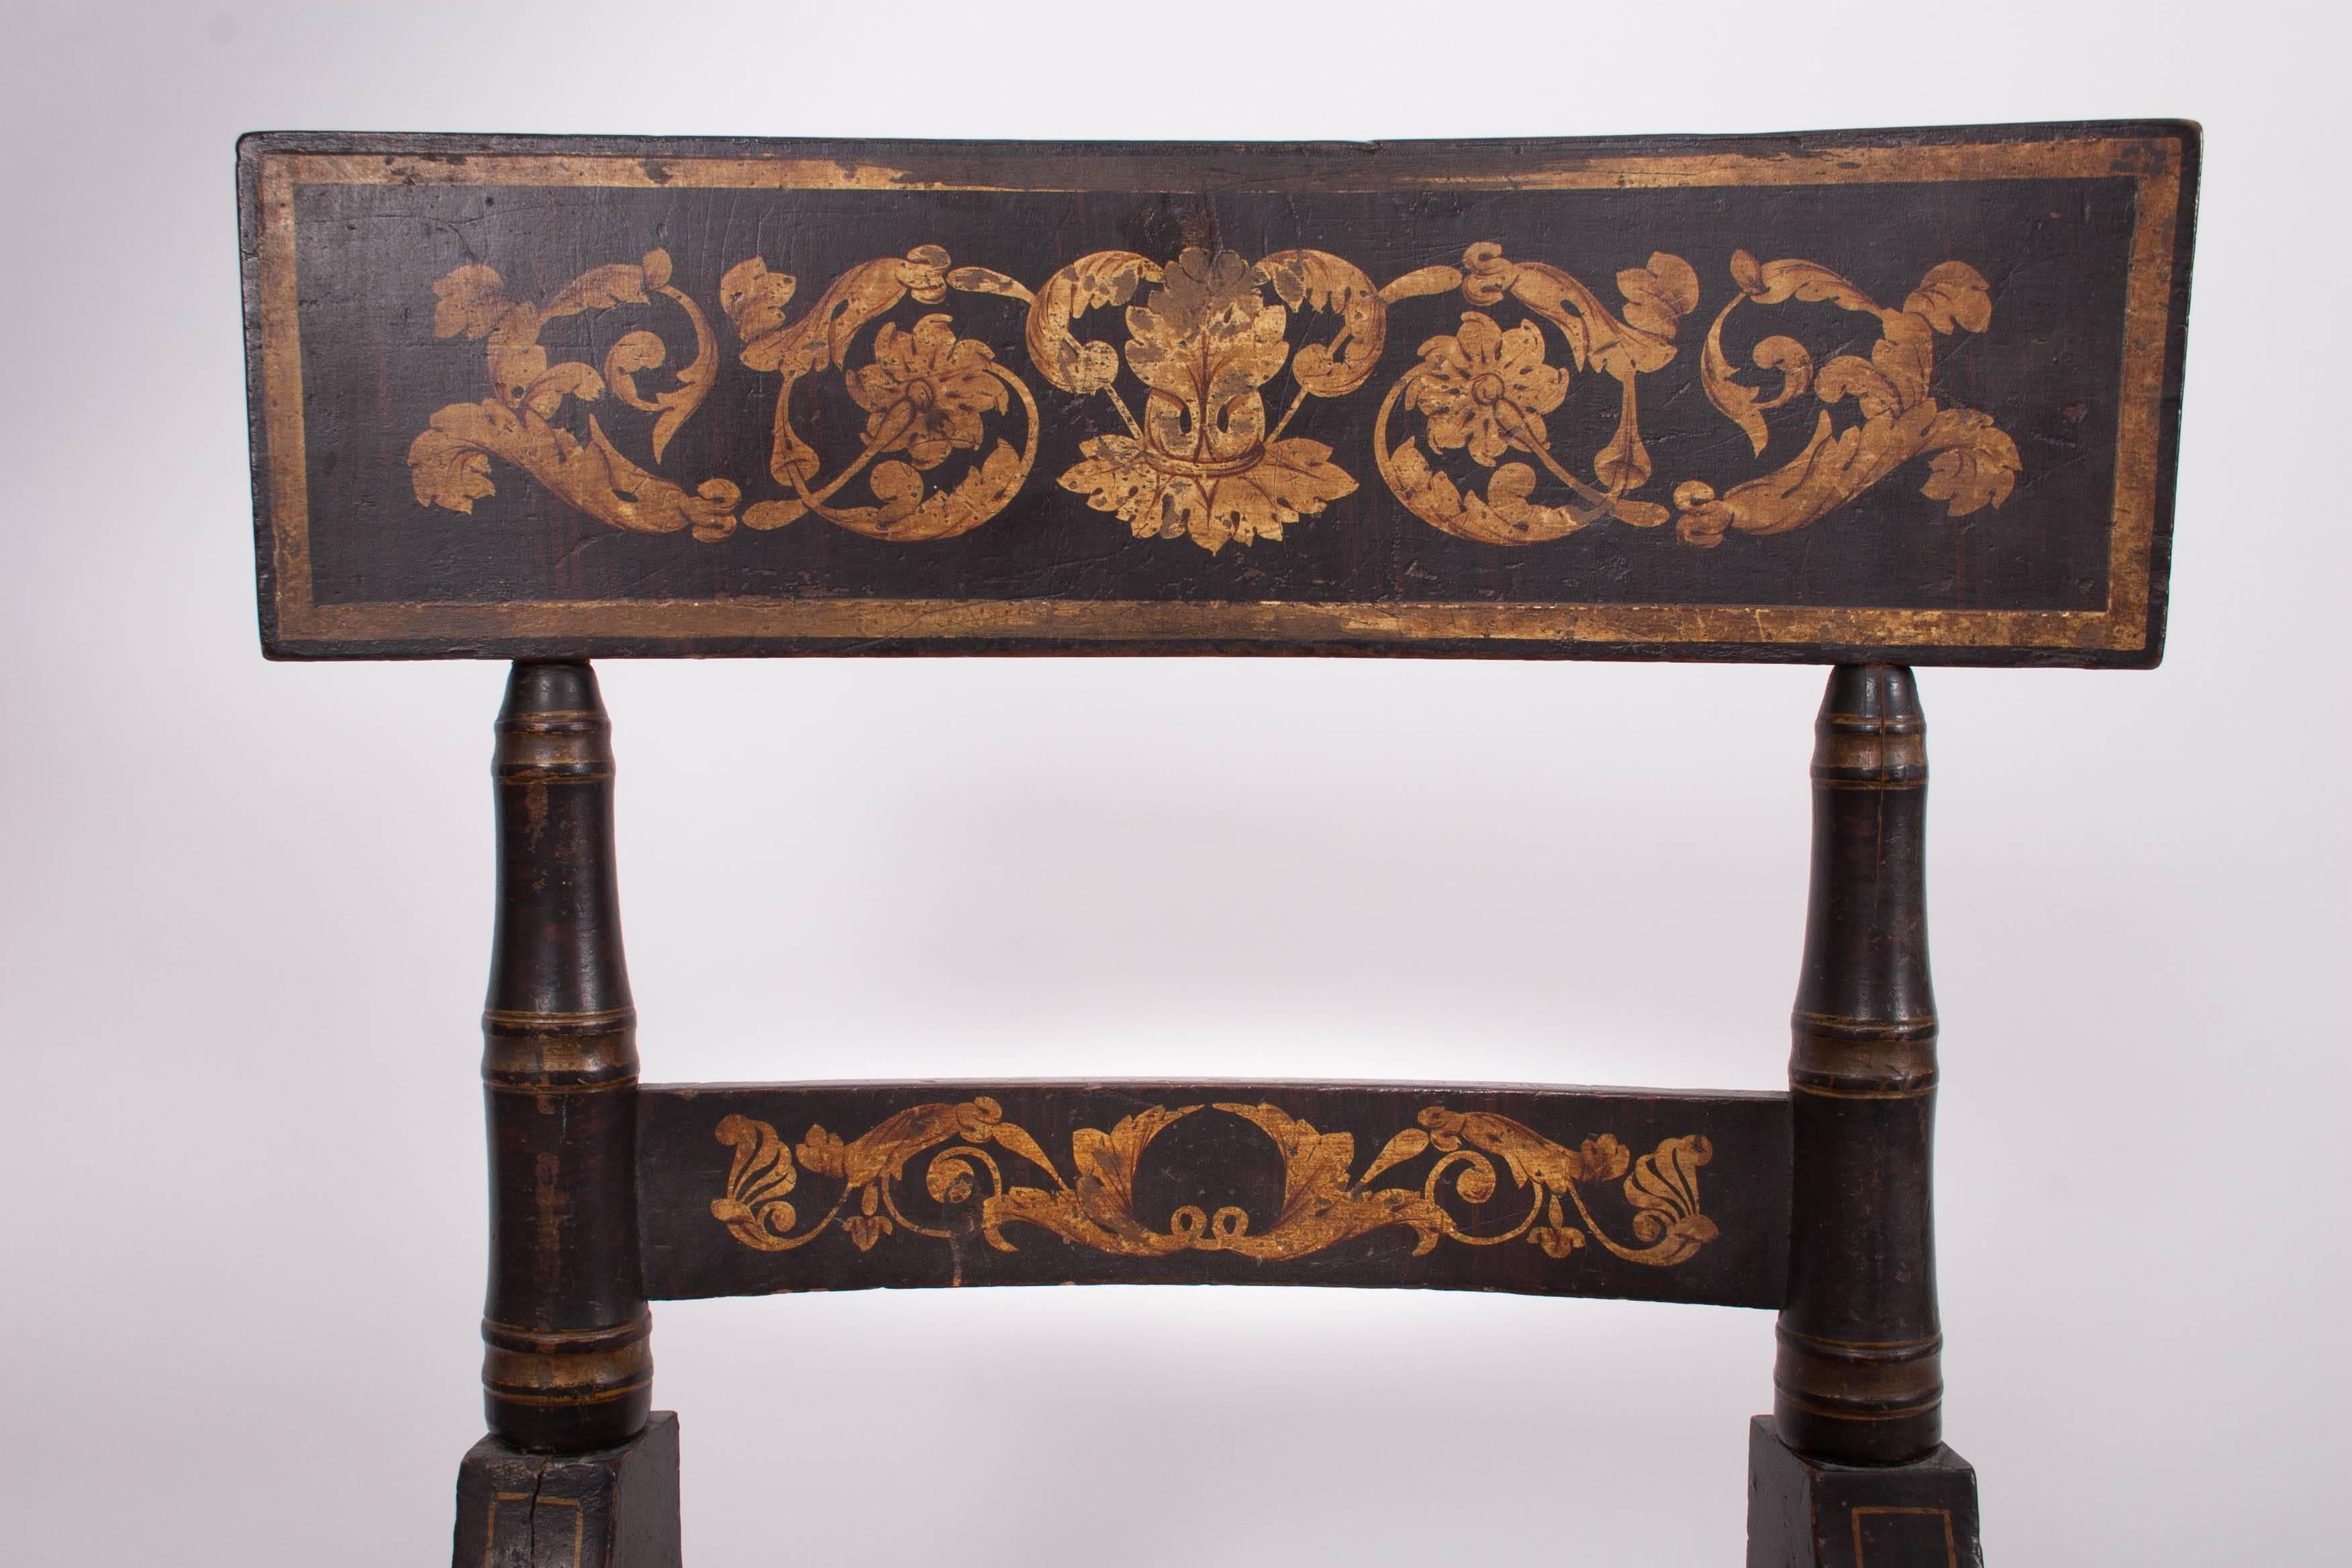 Baltimore, 1820-1830.

With faux-rosewood graining and gilt stencil decoration, the shaped crest rails held by turned stiles, a stay rail above a rush seat withy turned front and rear legs connected by stretchers.

Related chairs are in the